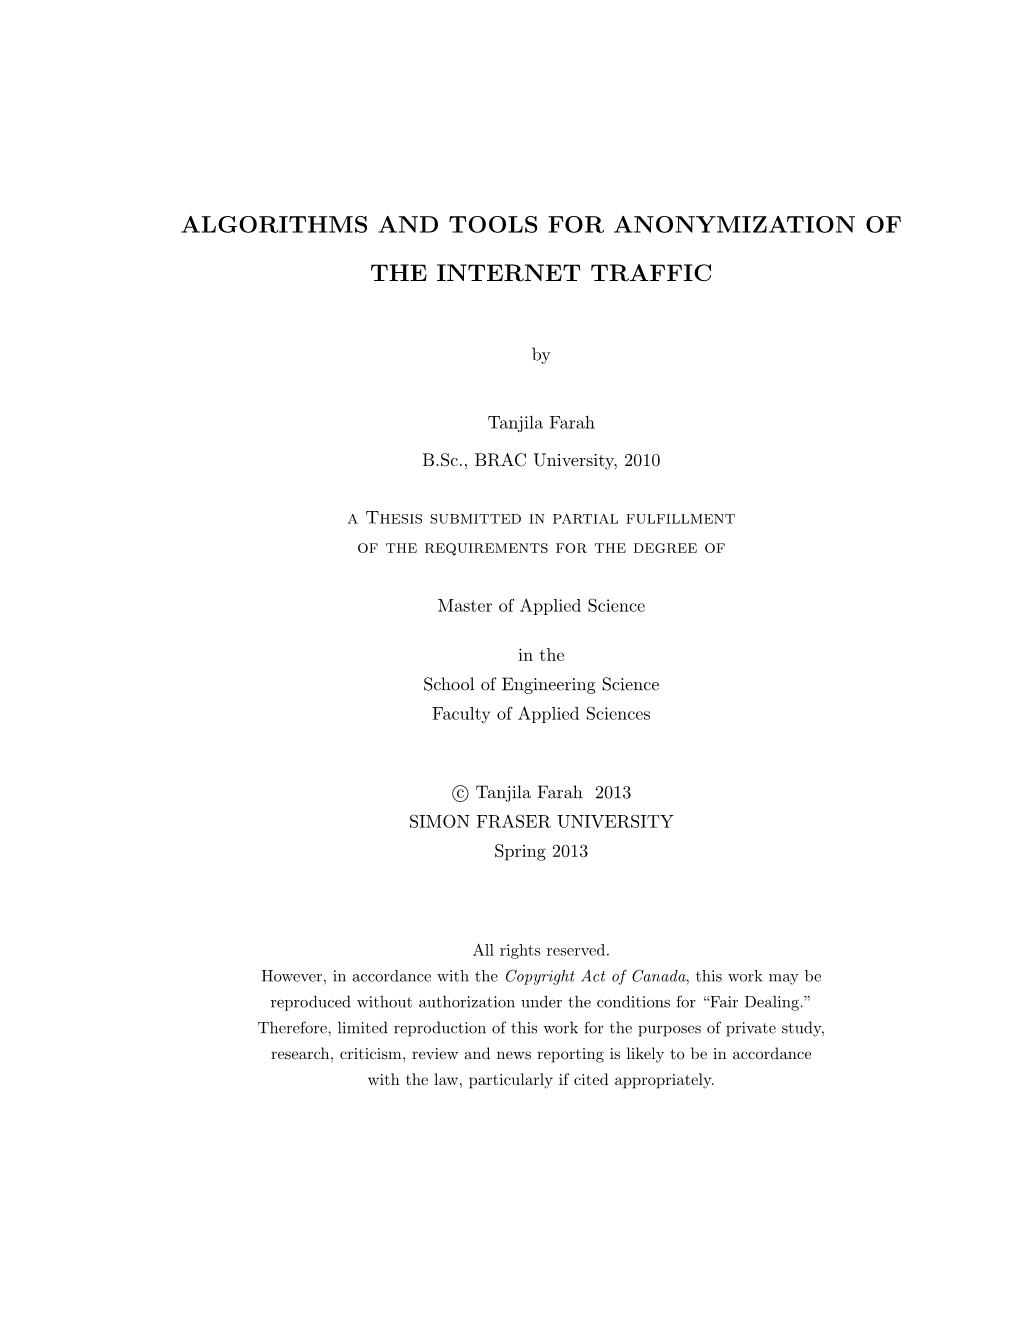 Algorithms and Tools for Anonymization of the Internet Traf- ﬁc